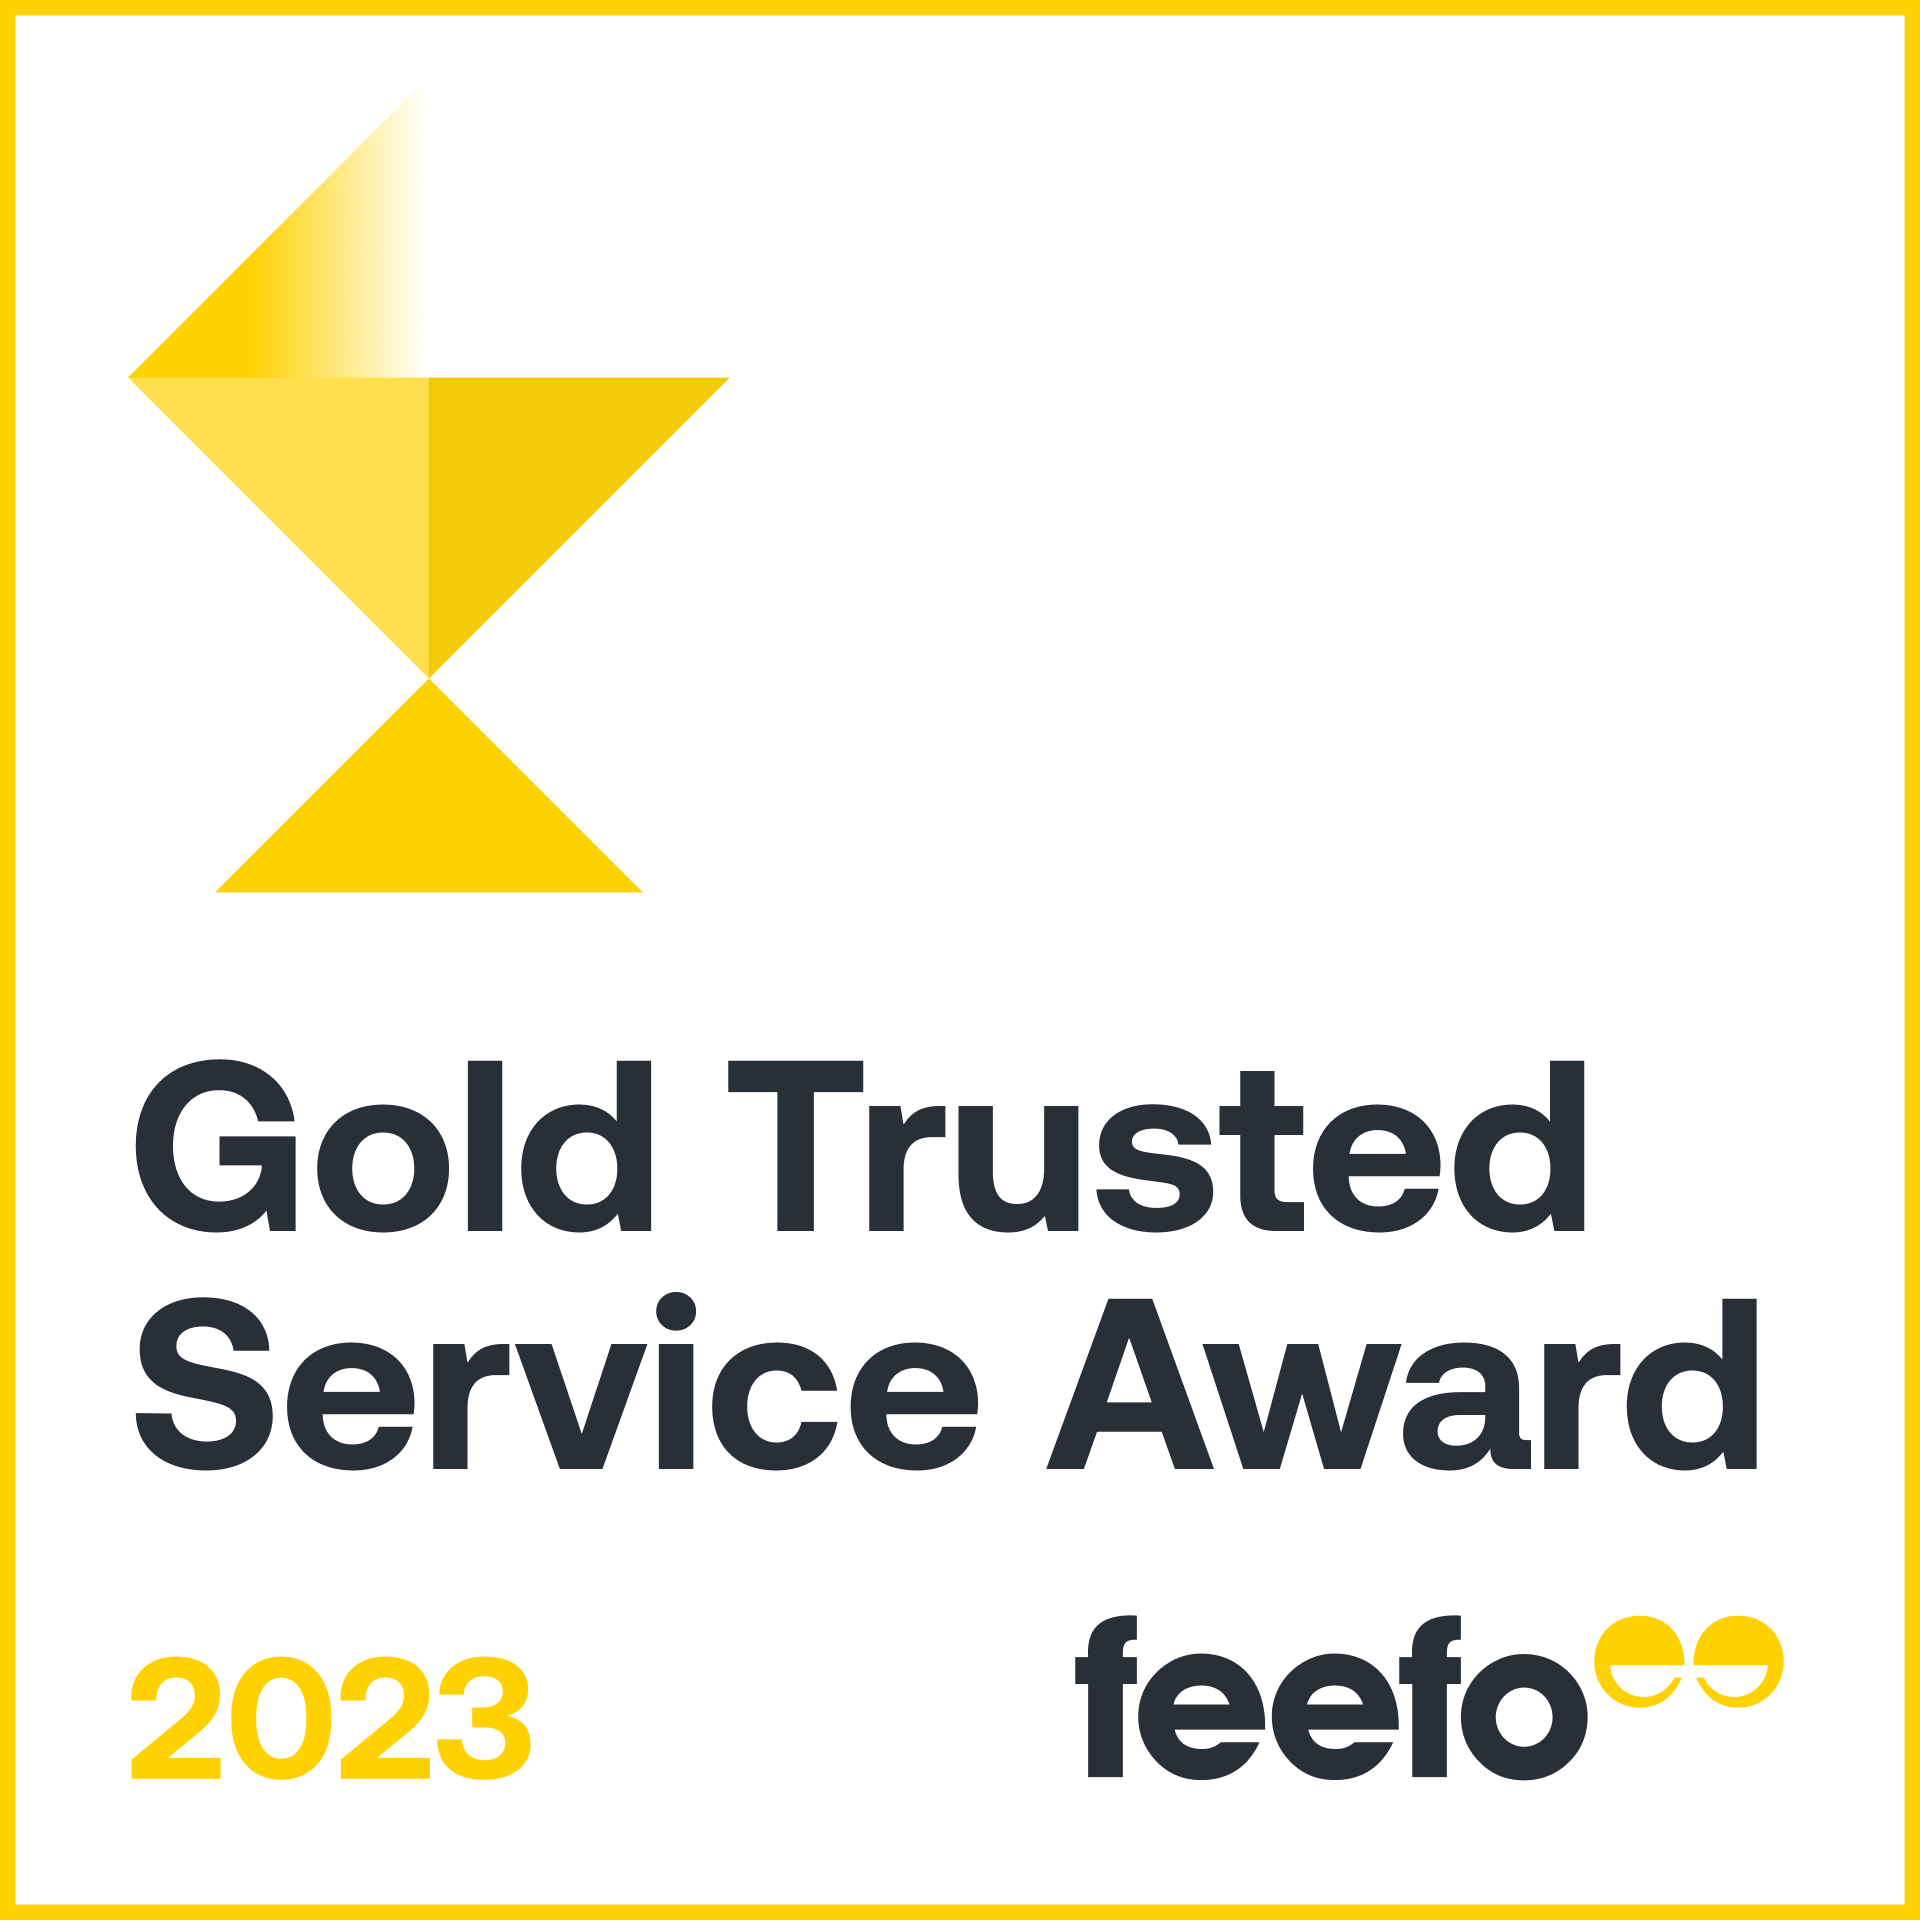 2023 Gold Trusted Service Award